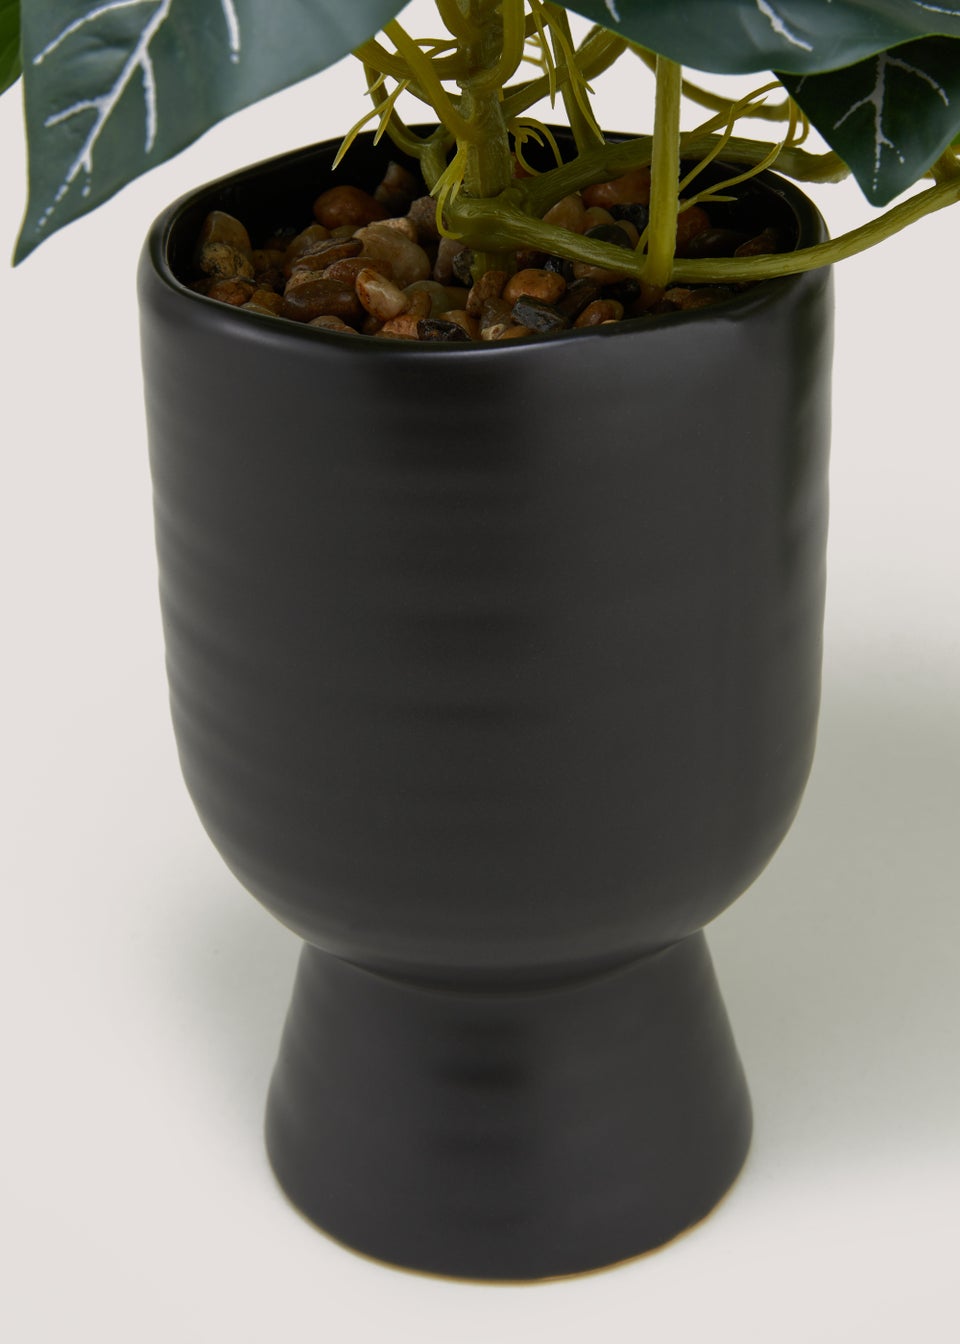 Trailing Plant in Tall Rounded Pot (33cm x 10cm)